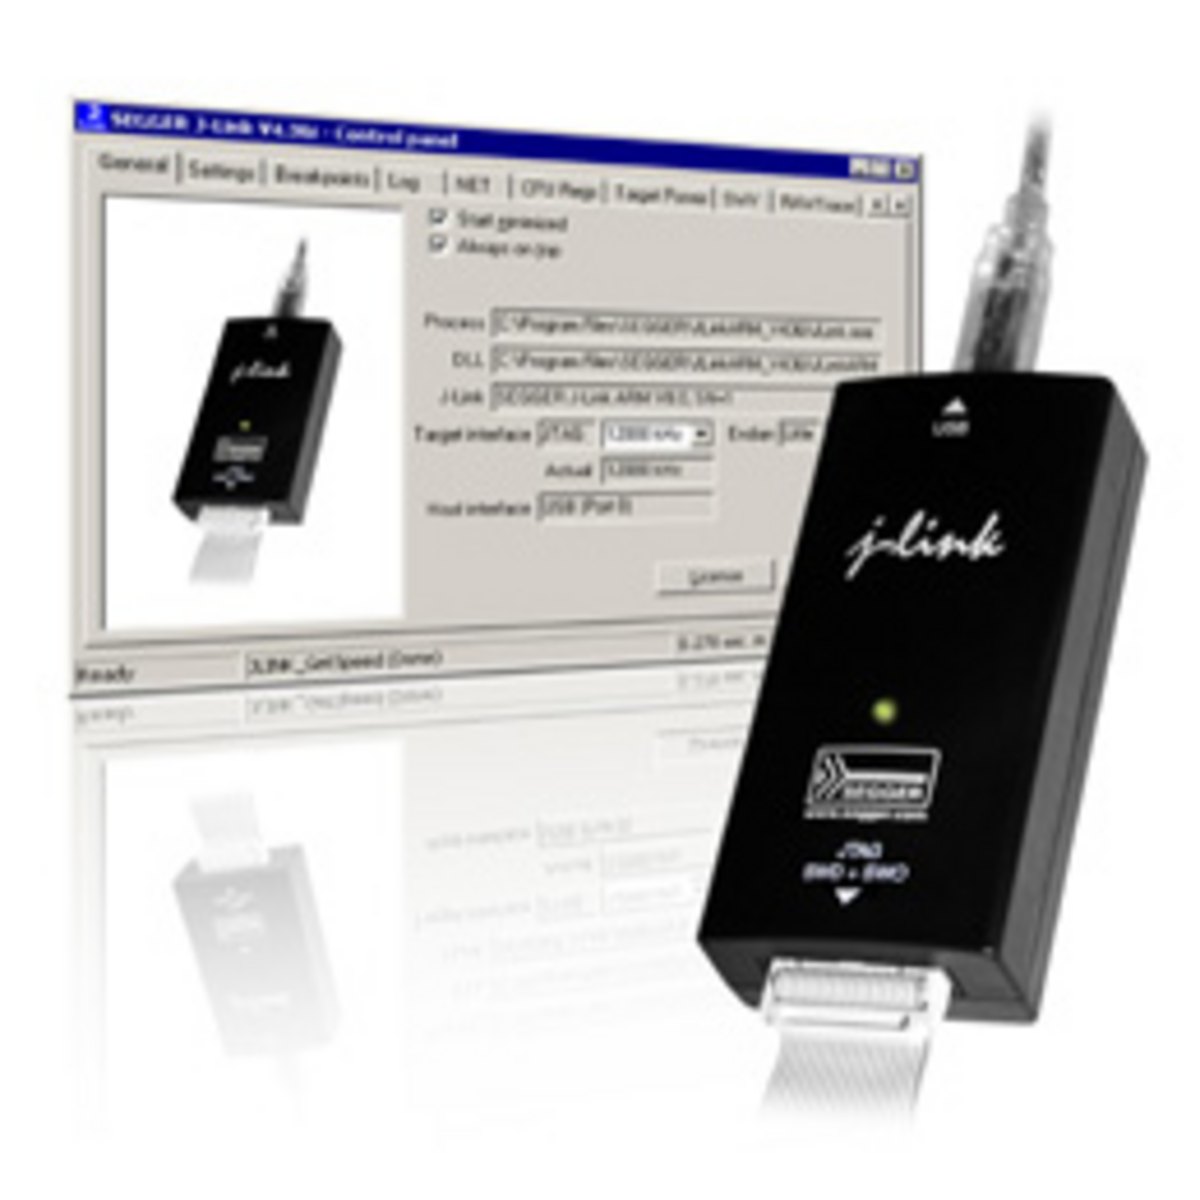 SEGGER Makes J Link Flash Download Available For Free SEGGER The Embedded Experts